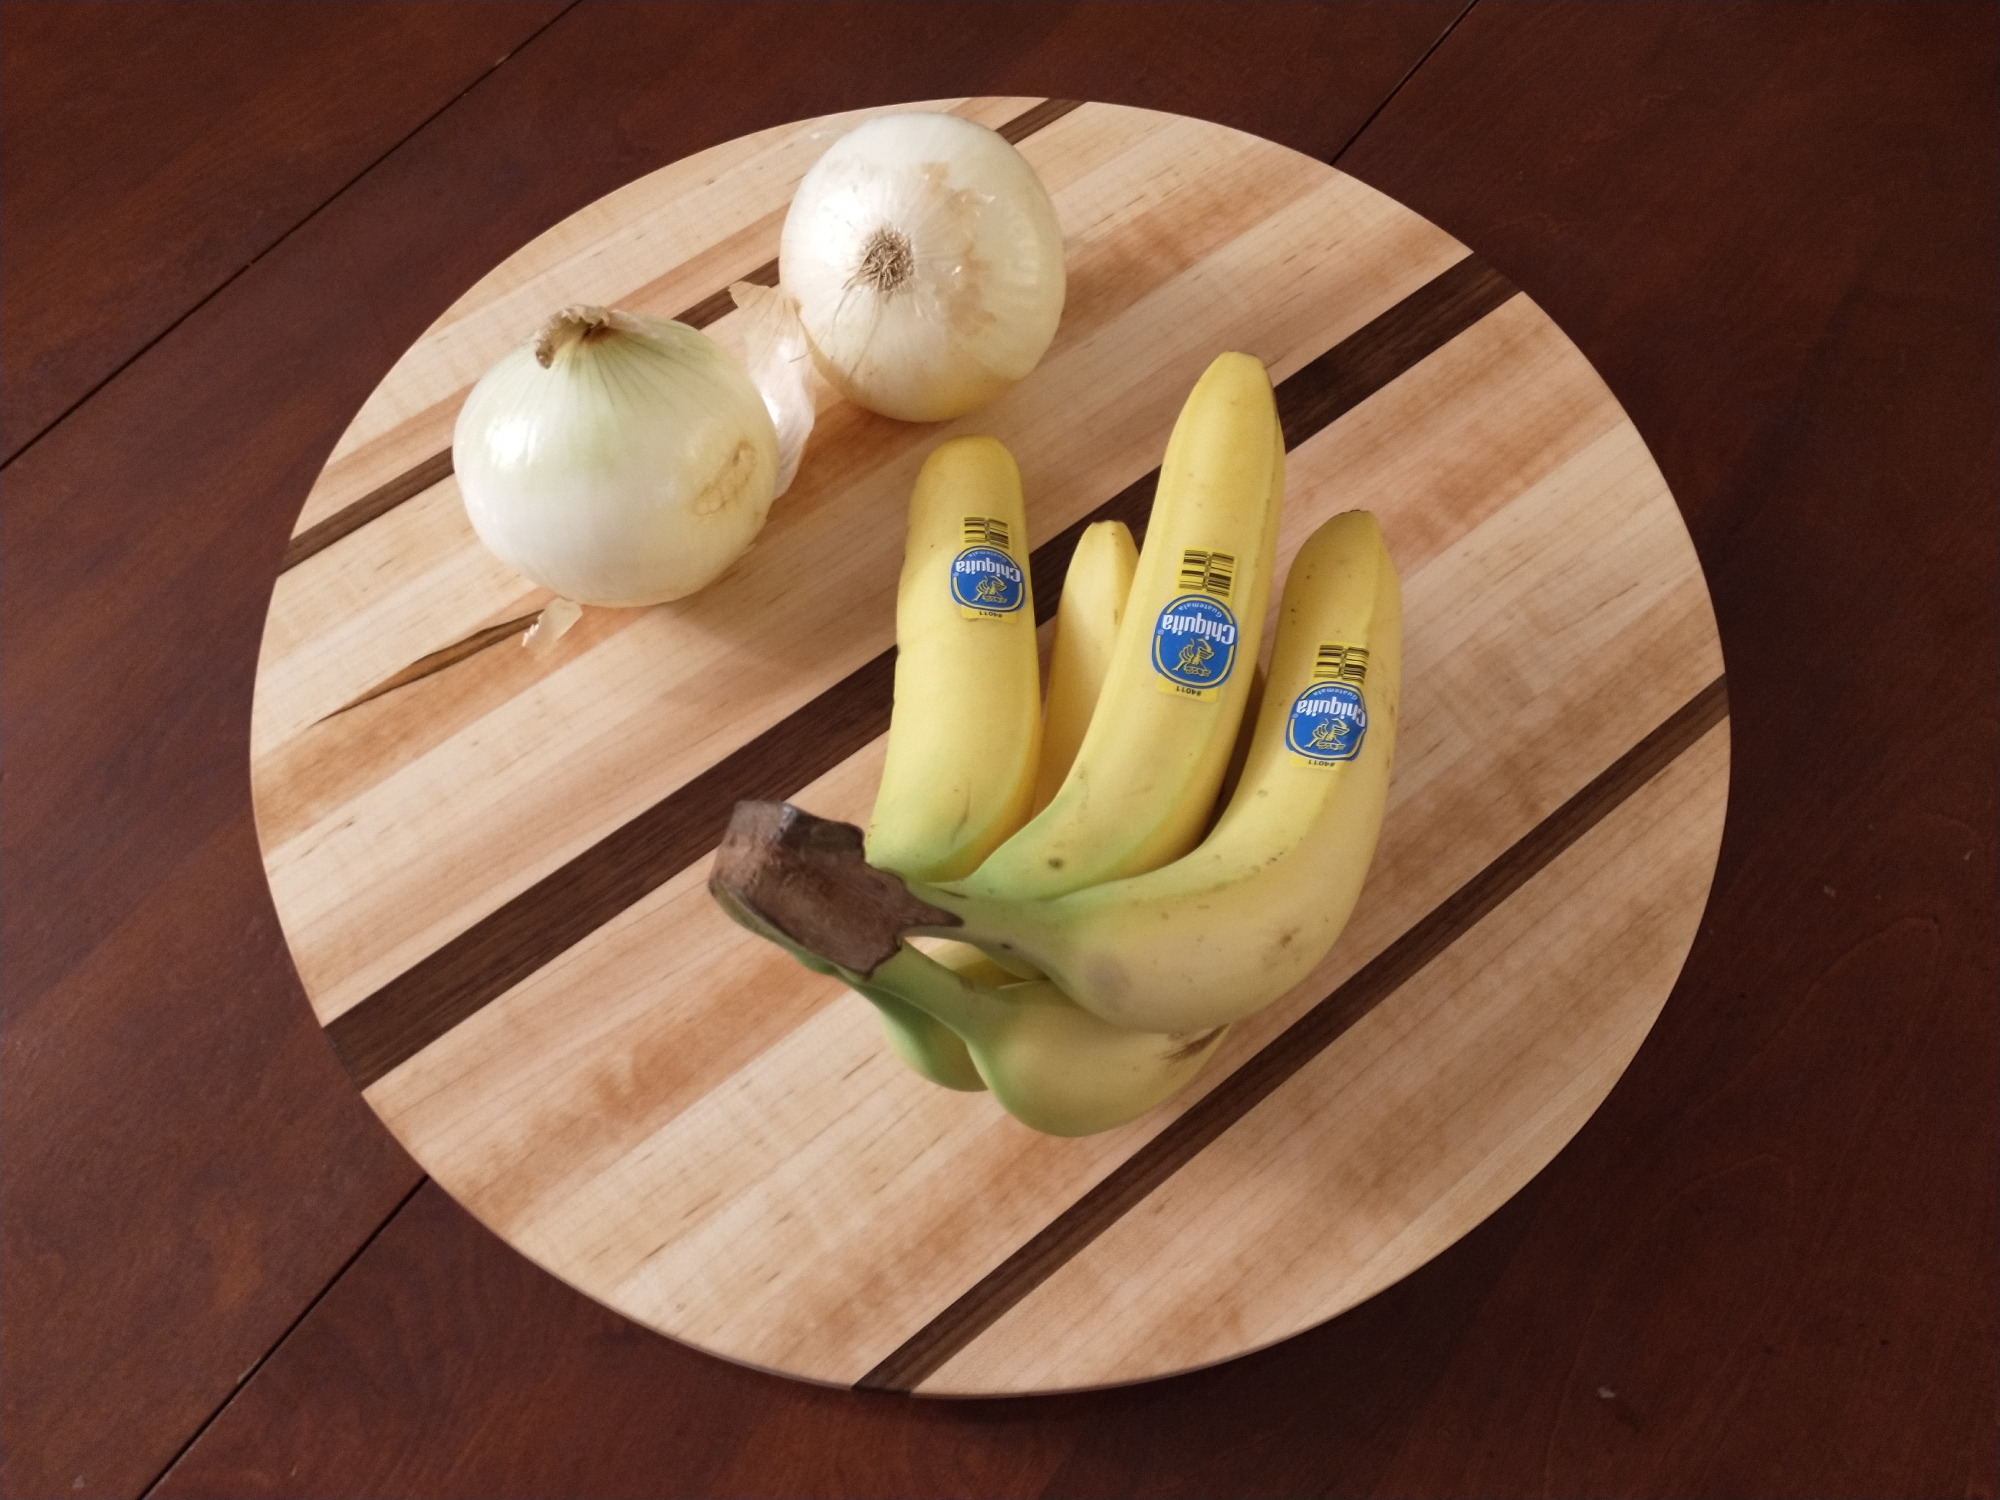 Make Cutting Boards With Minimal Tools : 11 Steps (with Pictures